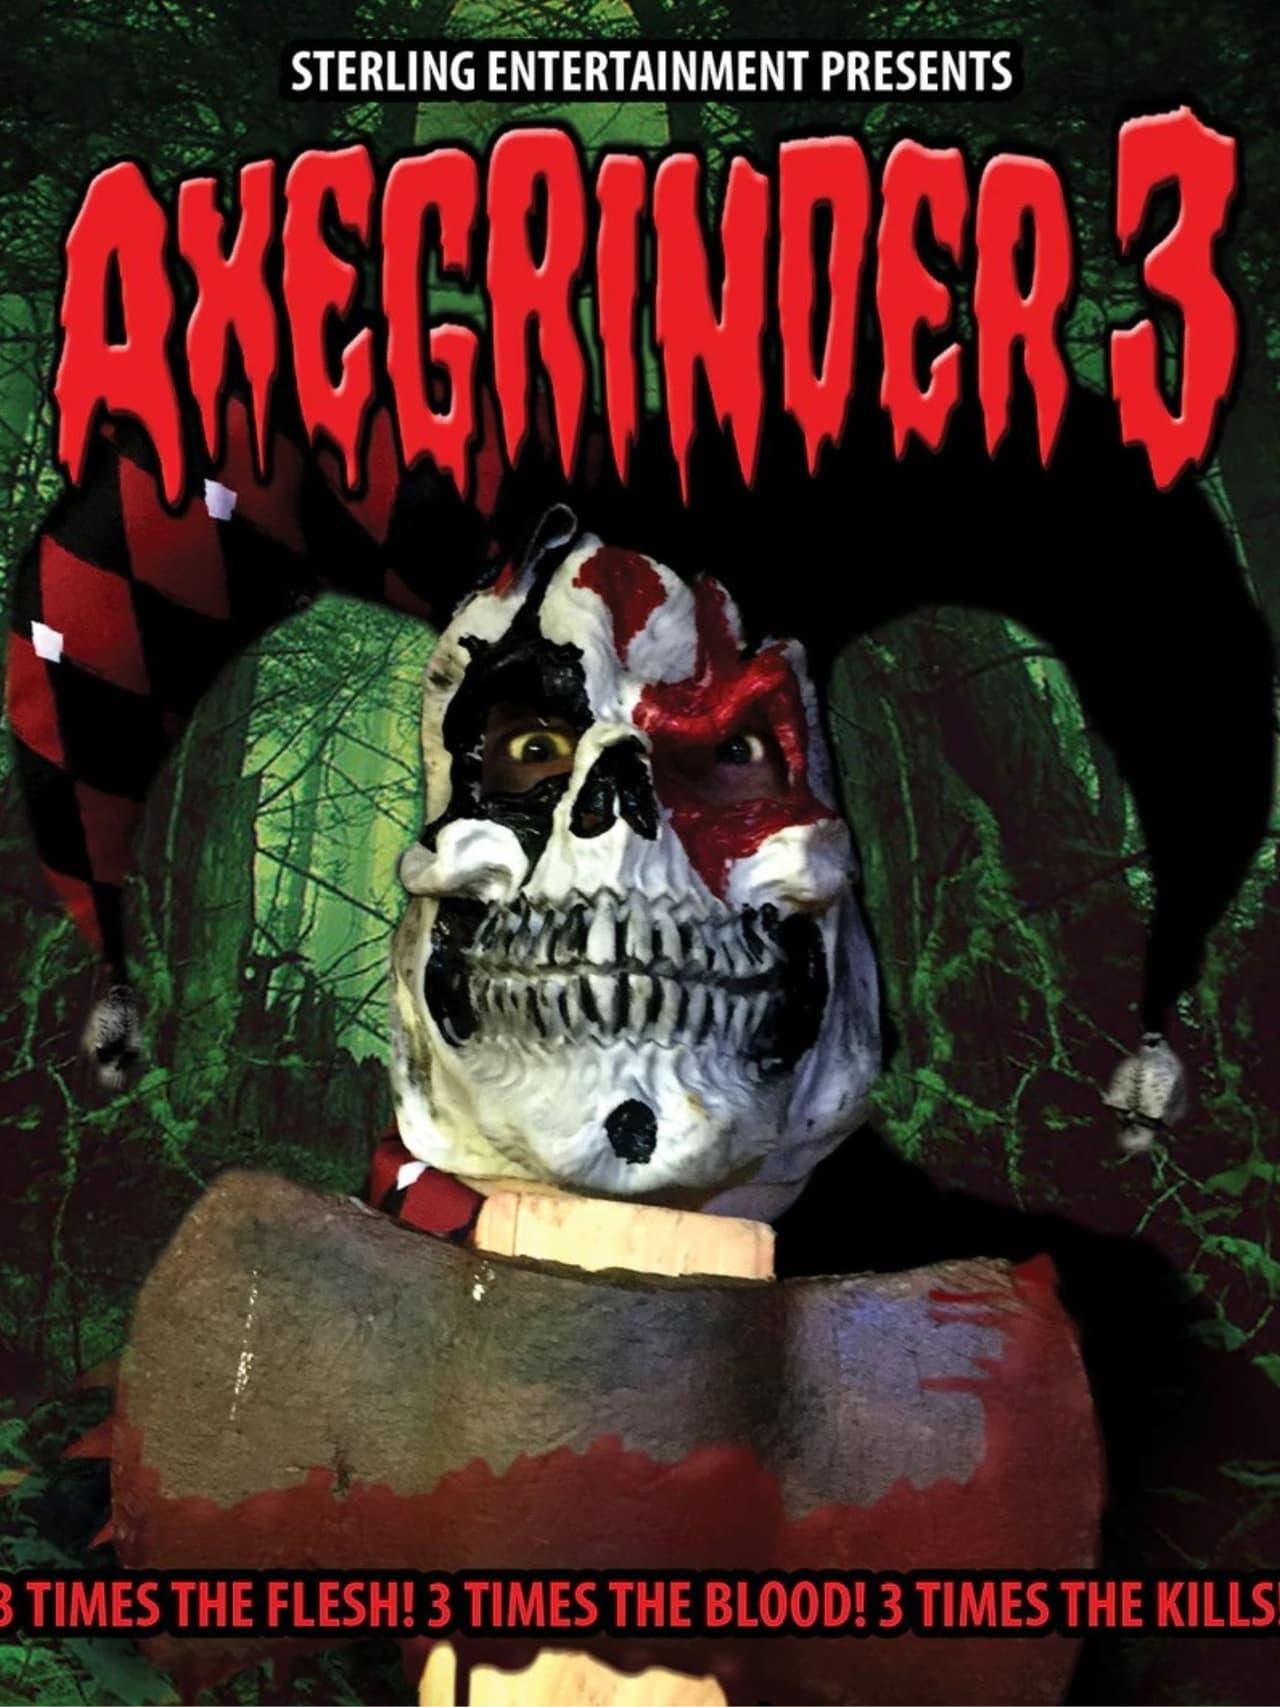 Axegrinder 3 poster